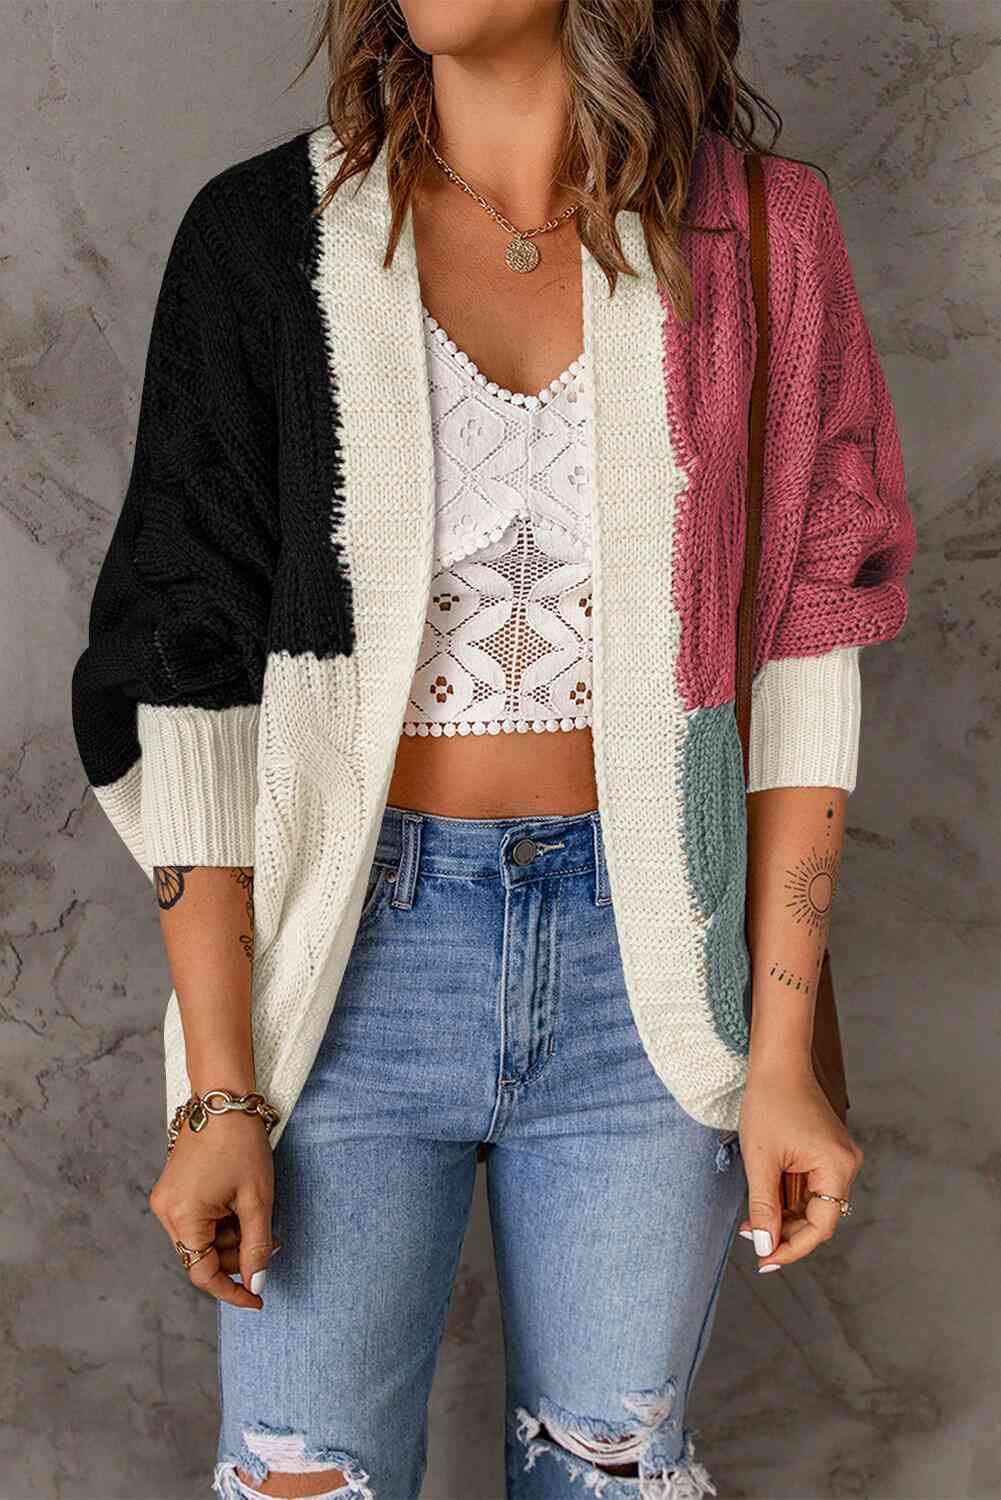 Woven Right Color Block Cable-Knit Batwing Sleeve Cardigan Black/Pink